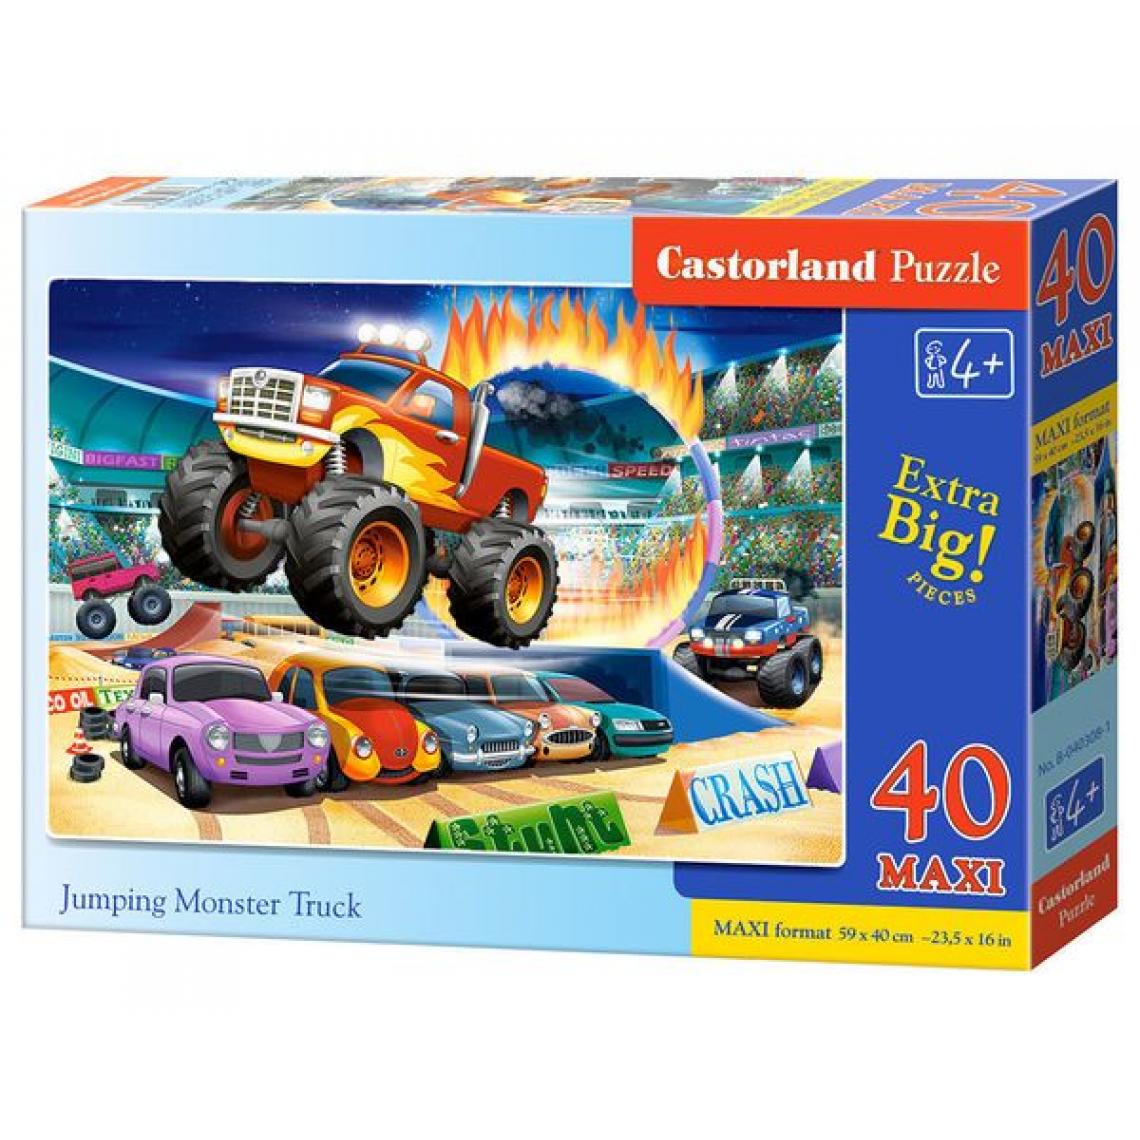 Castorland - Jumping Monster Truck, Puzzle 40 Teile maxi - Castorland - Animaux